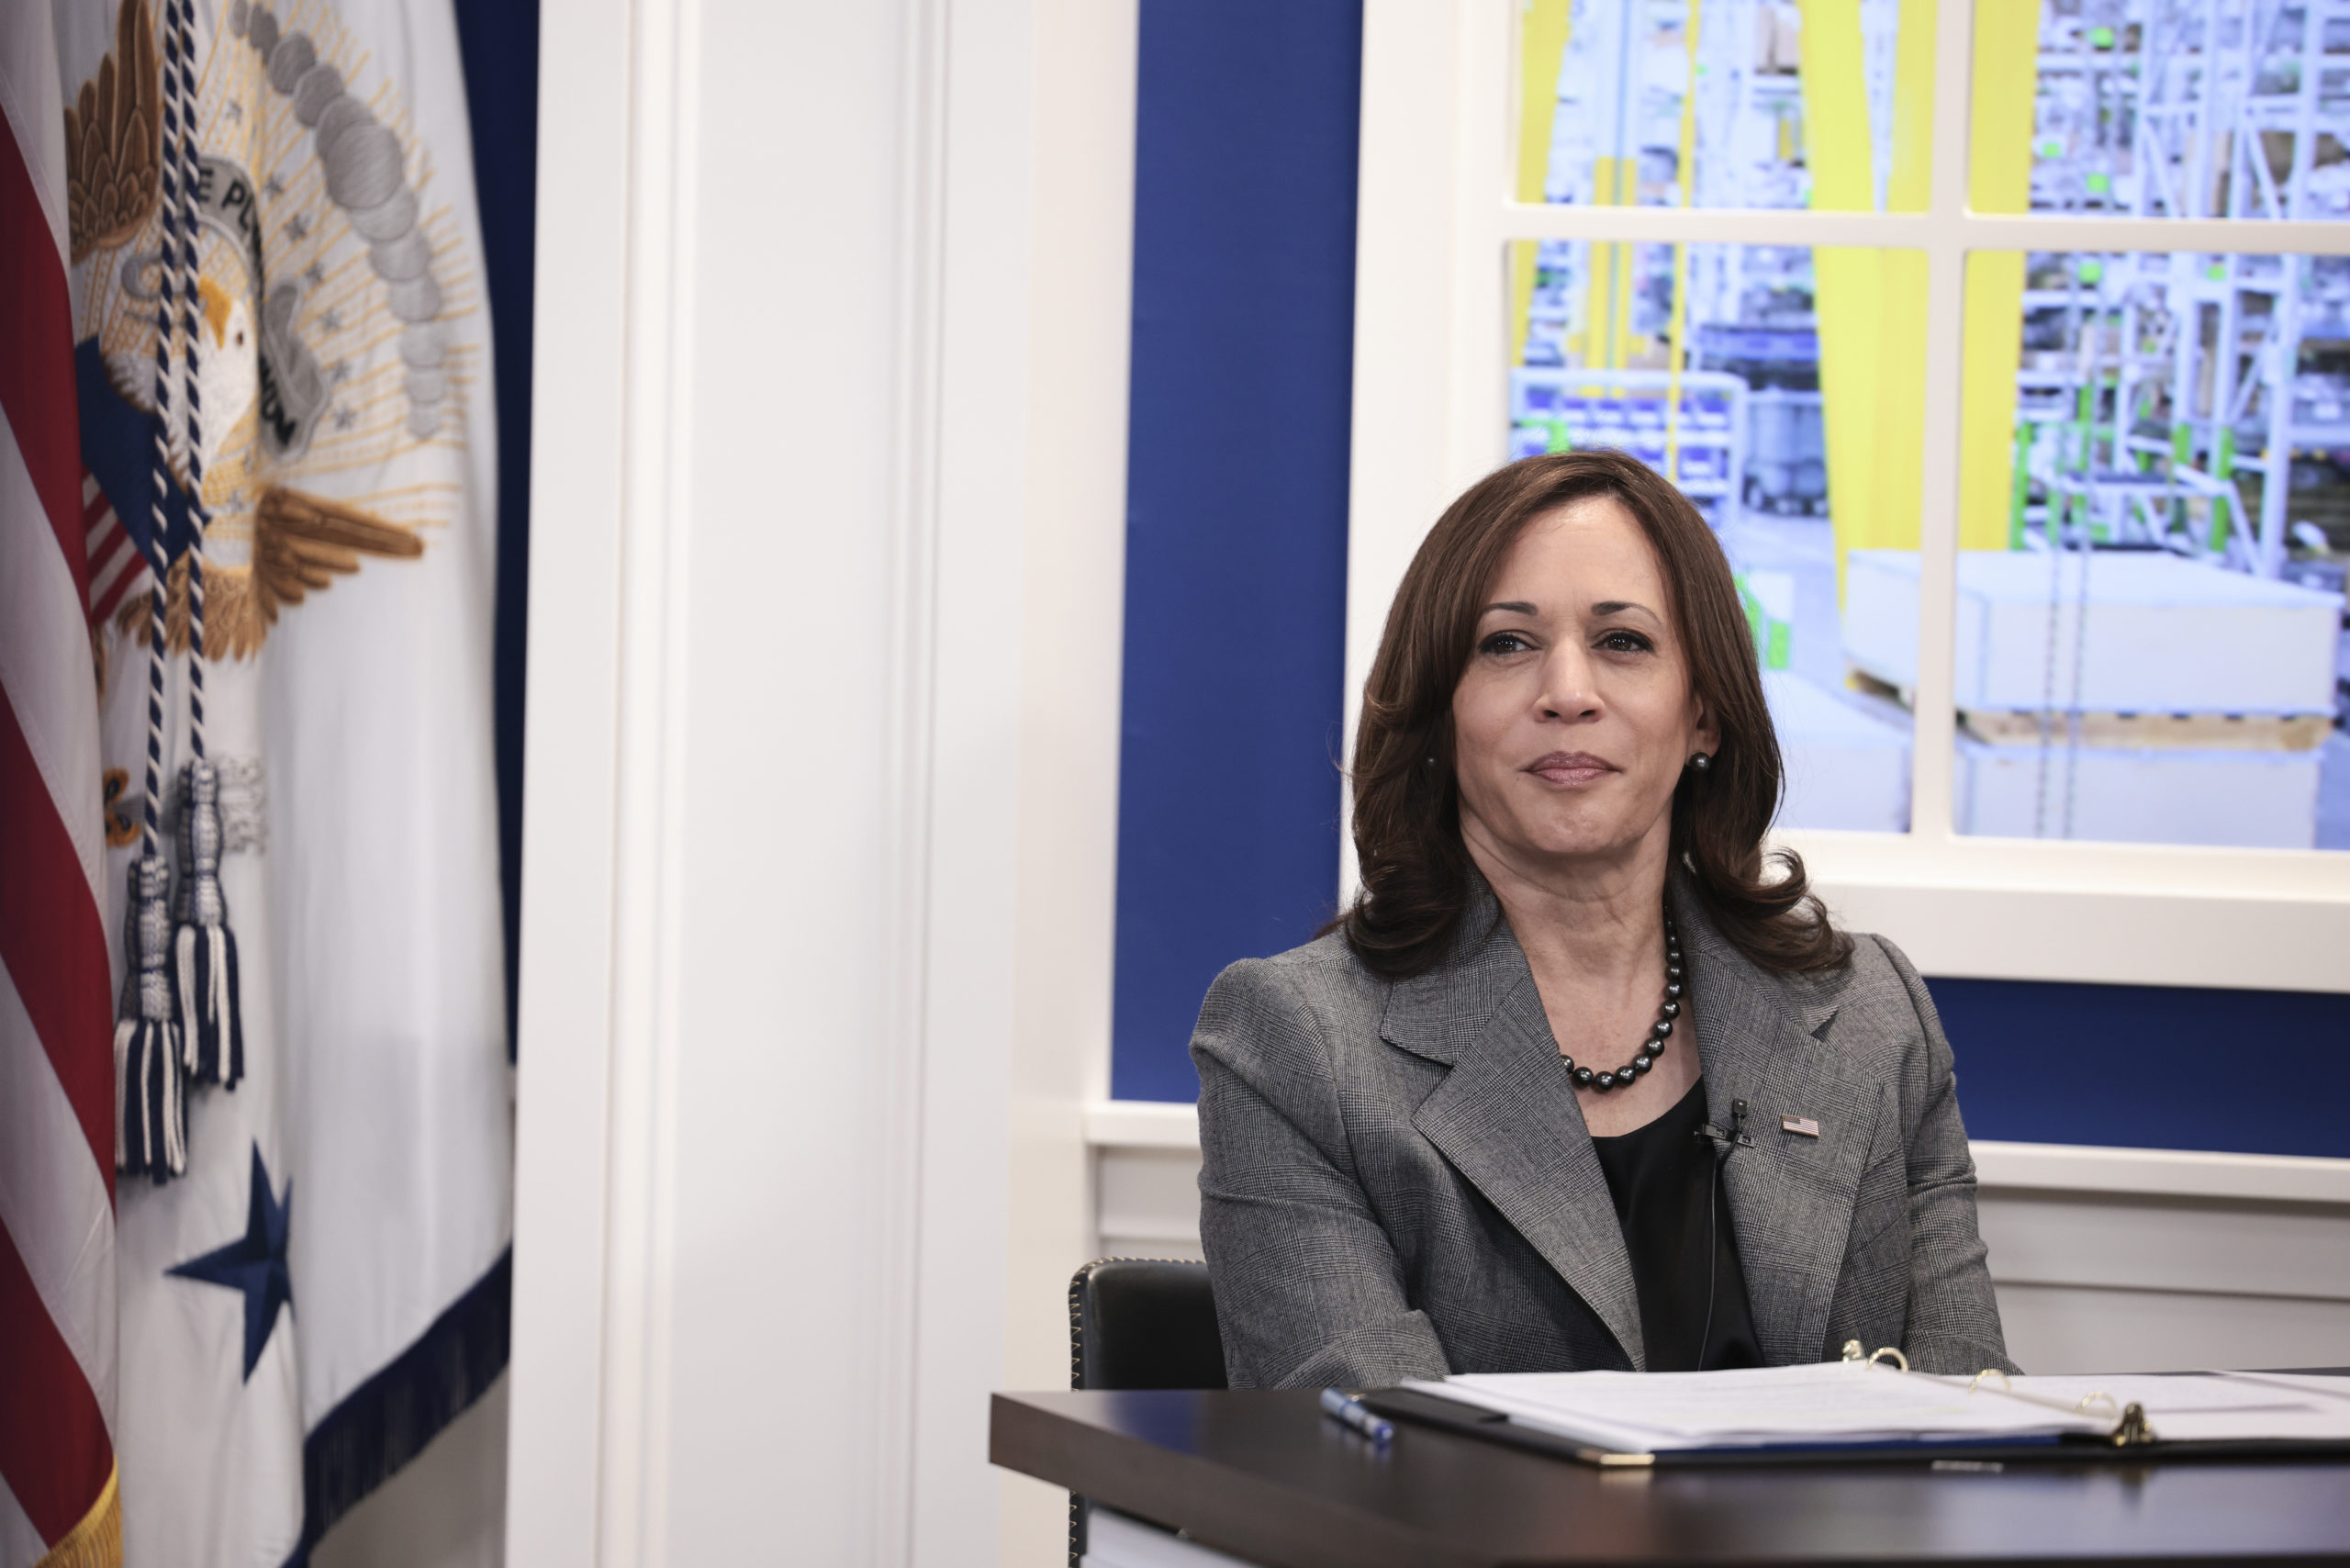 WASHINGTON, DC - OCTOBER 20: U.S. Vice President Kamala Harris listens during a roundtable with Labor Secretary Marty Walsh, Director of U.S. Office of Personnel Management Kiran Ahuja and federal workers, appearing virtually, in the South Court Auditorium in the Eisenhower Executive Office Building on October 20, 2021 in Washington, DC. The roundtable was held for participants to discuss labor unions representing employees who work for the federal government. (Photo by Anna Moneymaker/Getty Images)